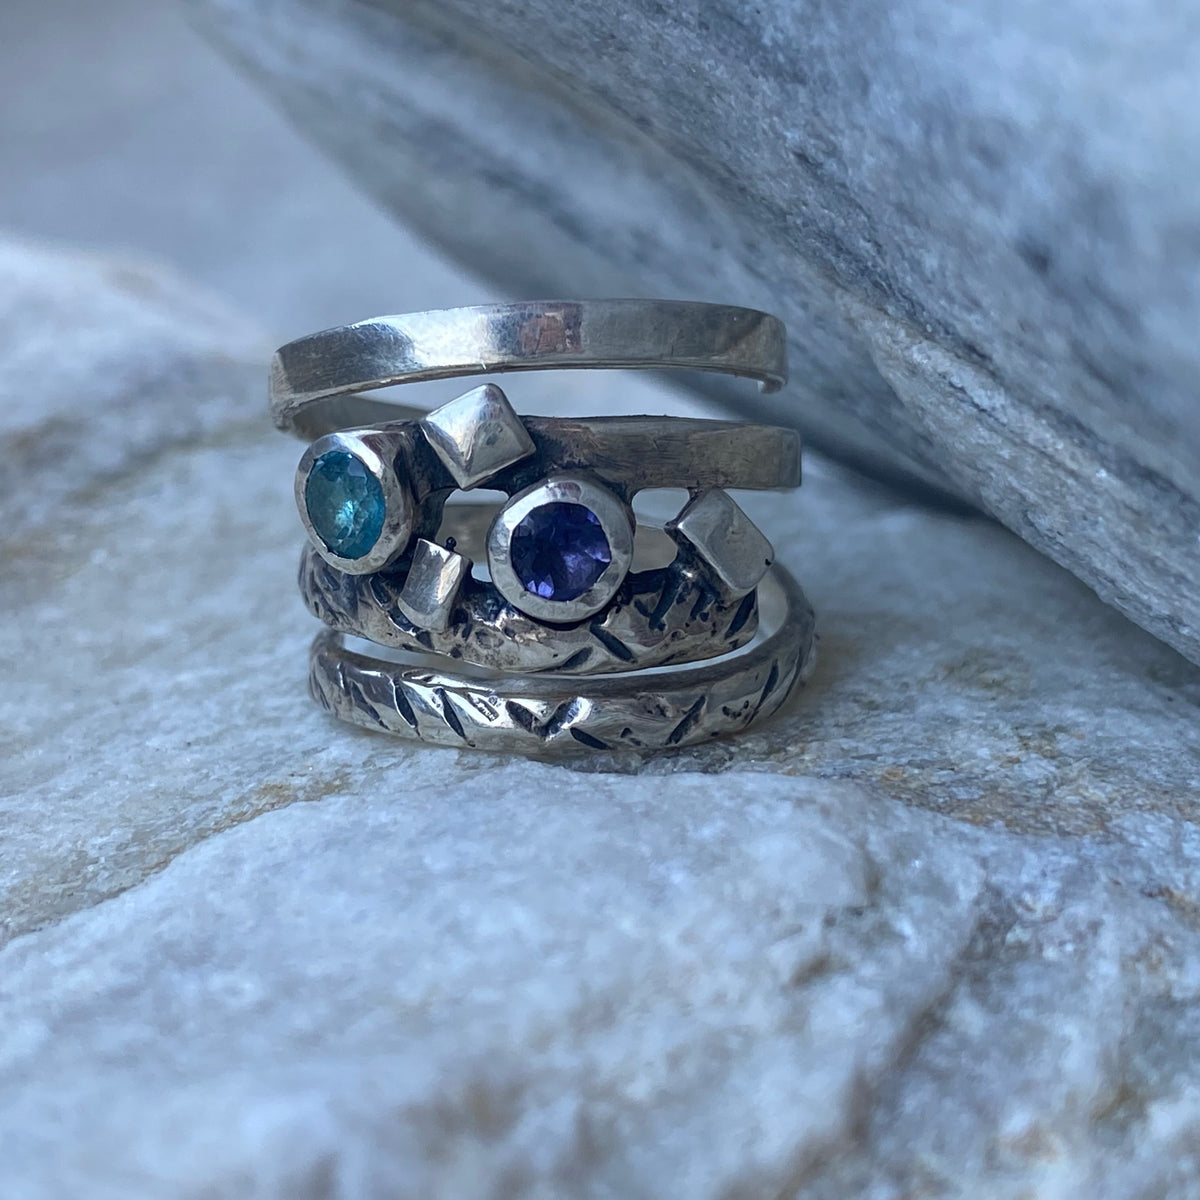 Silver spiral ring with blue gemstones, silver spring ring